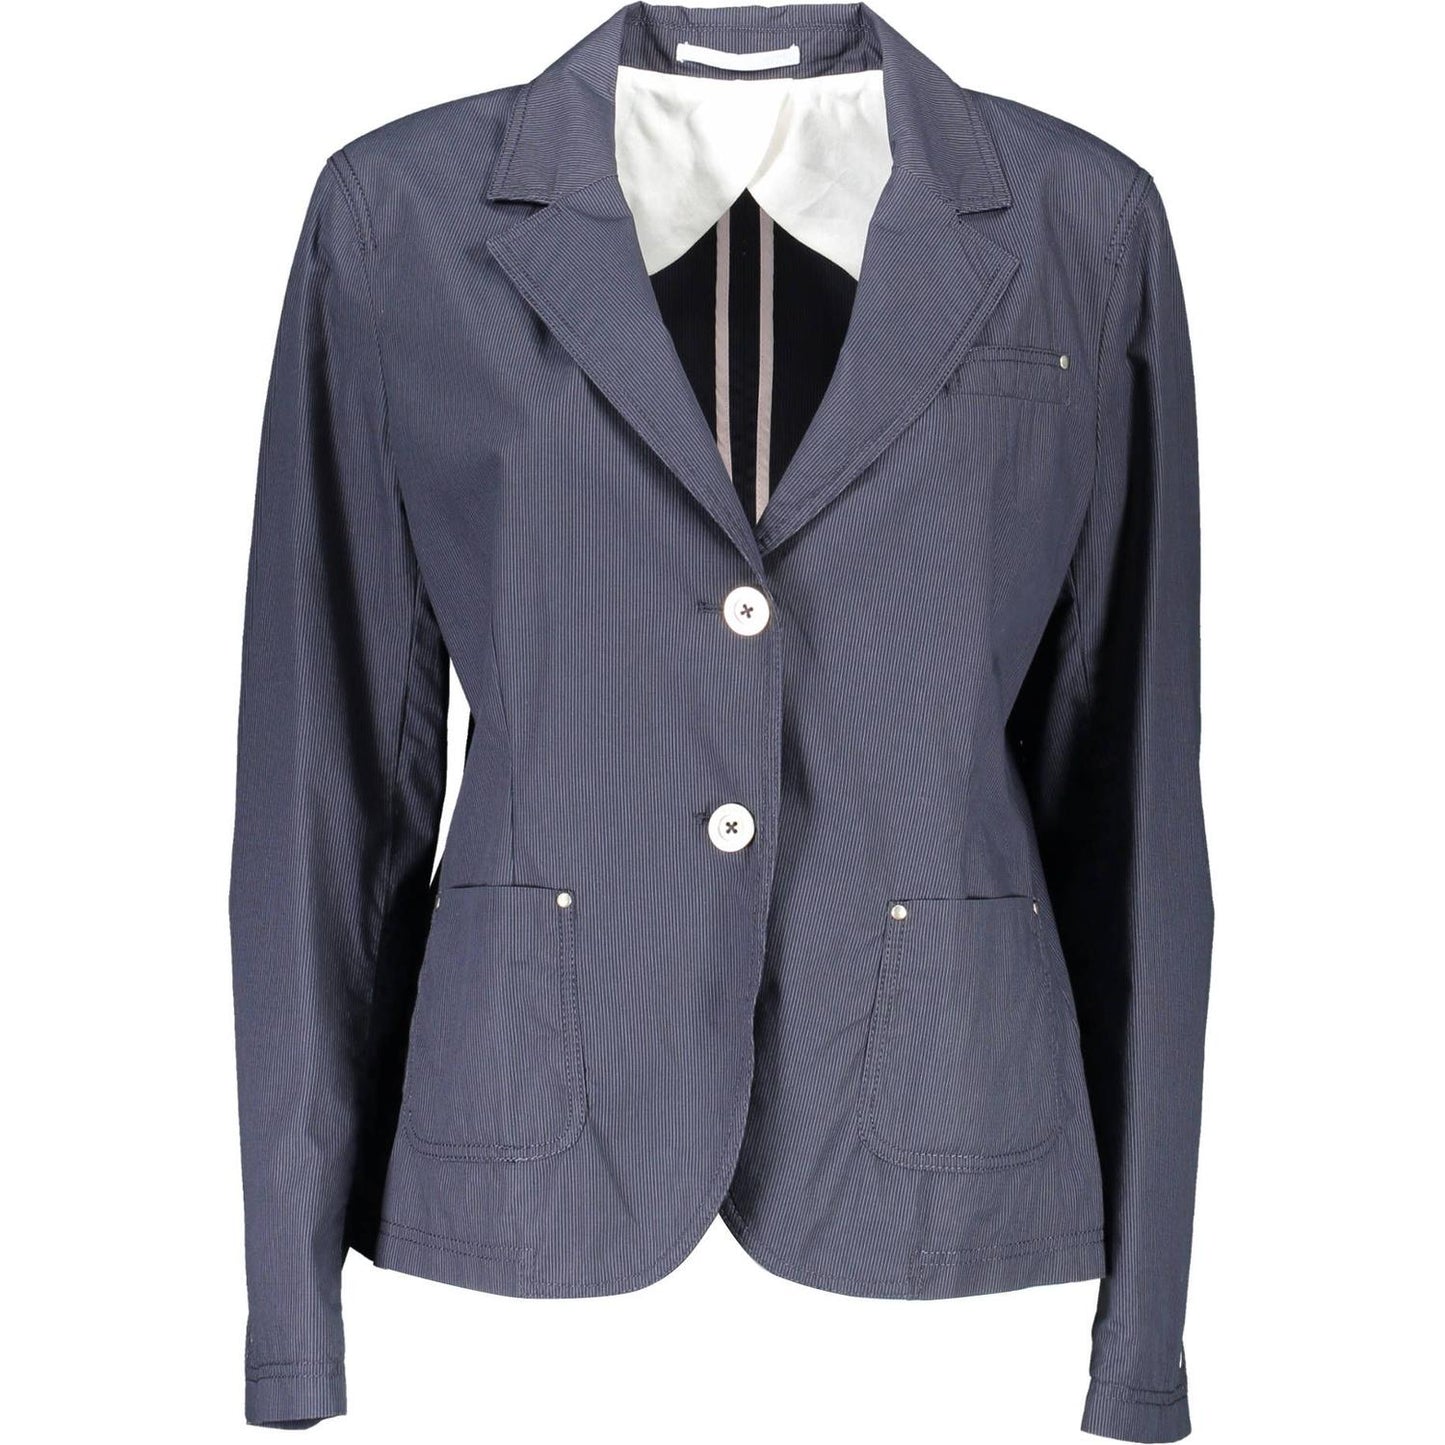 Gant Timeless Blue Cotton Jacket with Classic Appeal timeless-blue-cotton-jacket-with-classic-appeal